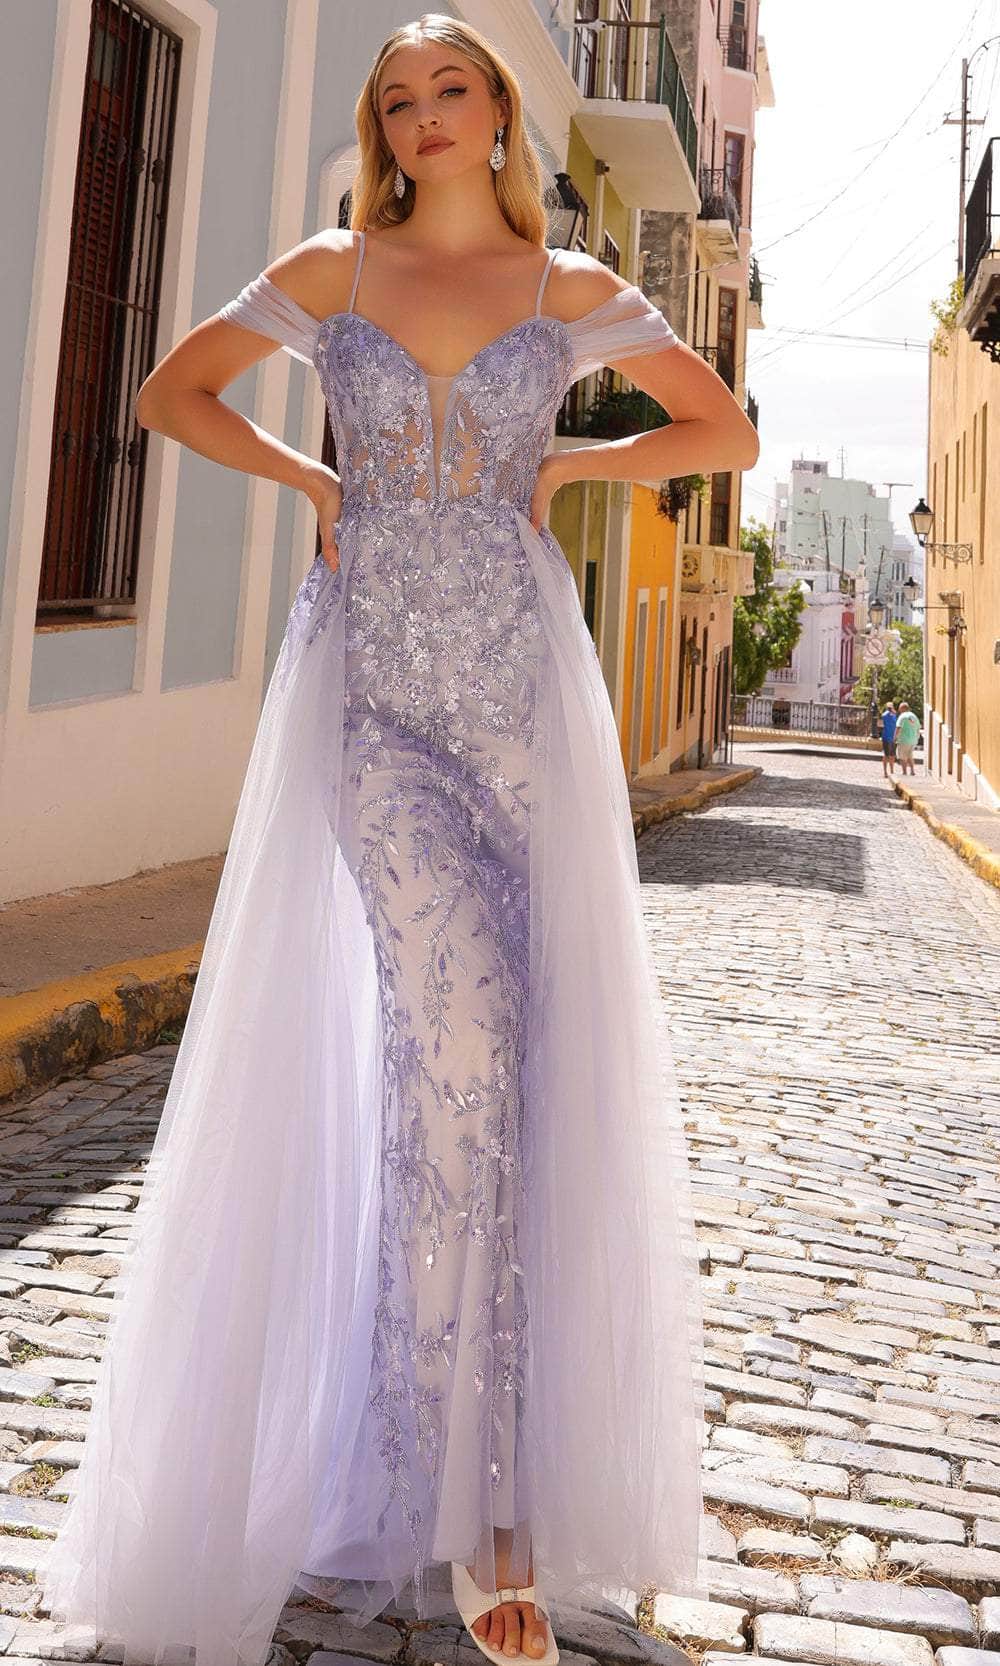 Nox Anabel L1362 - Floral Embroidered Plunging Neck Gown Prom Dresses 4 / Periwinkle